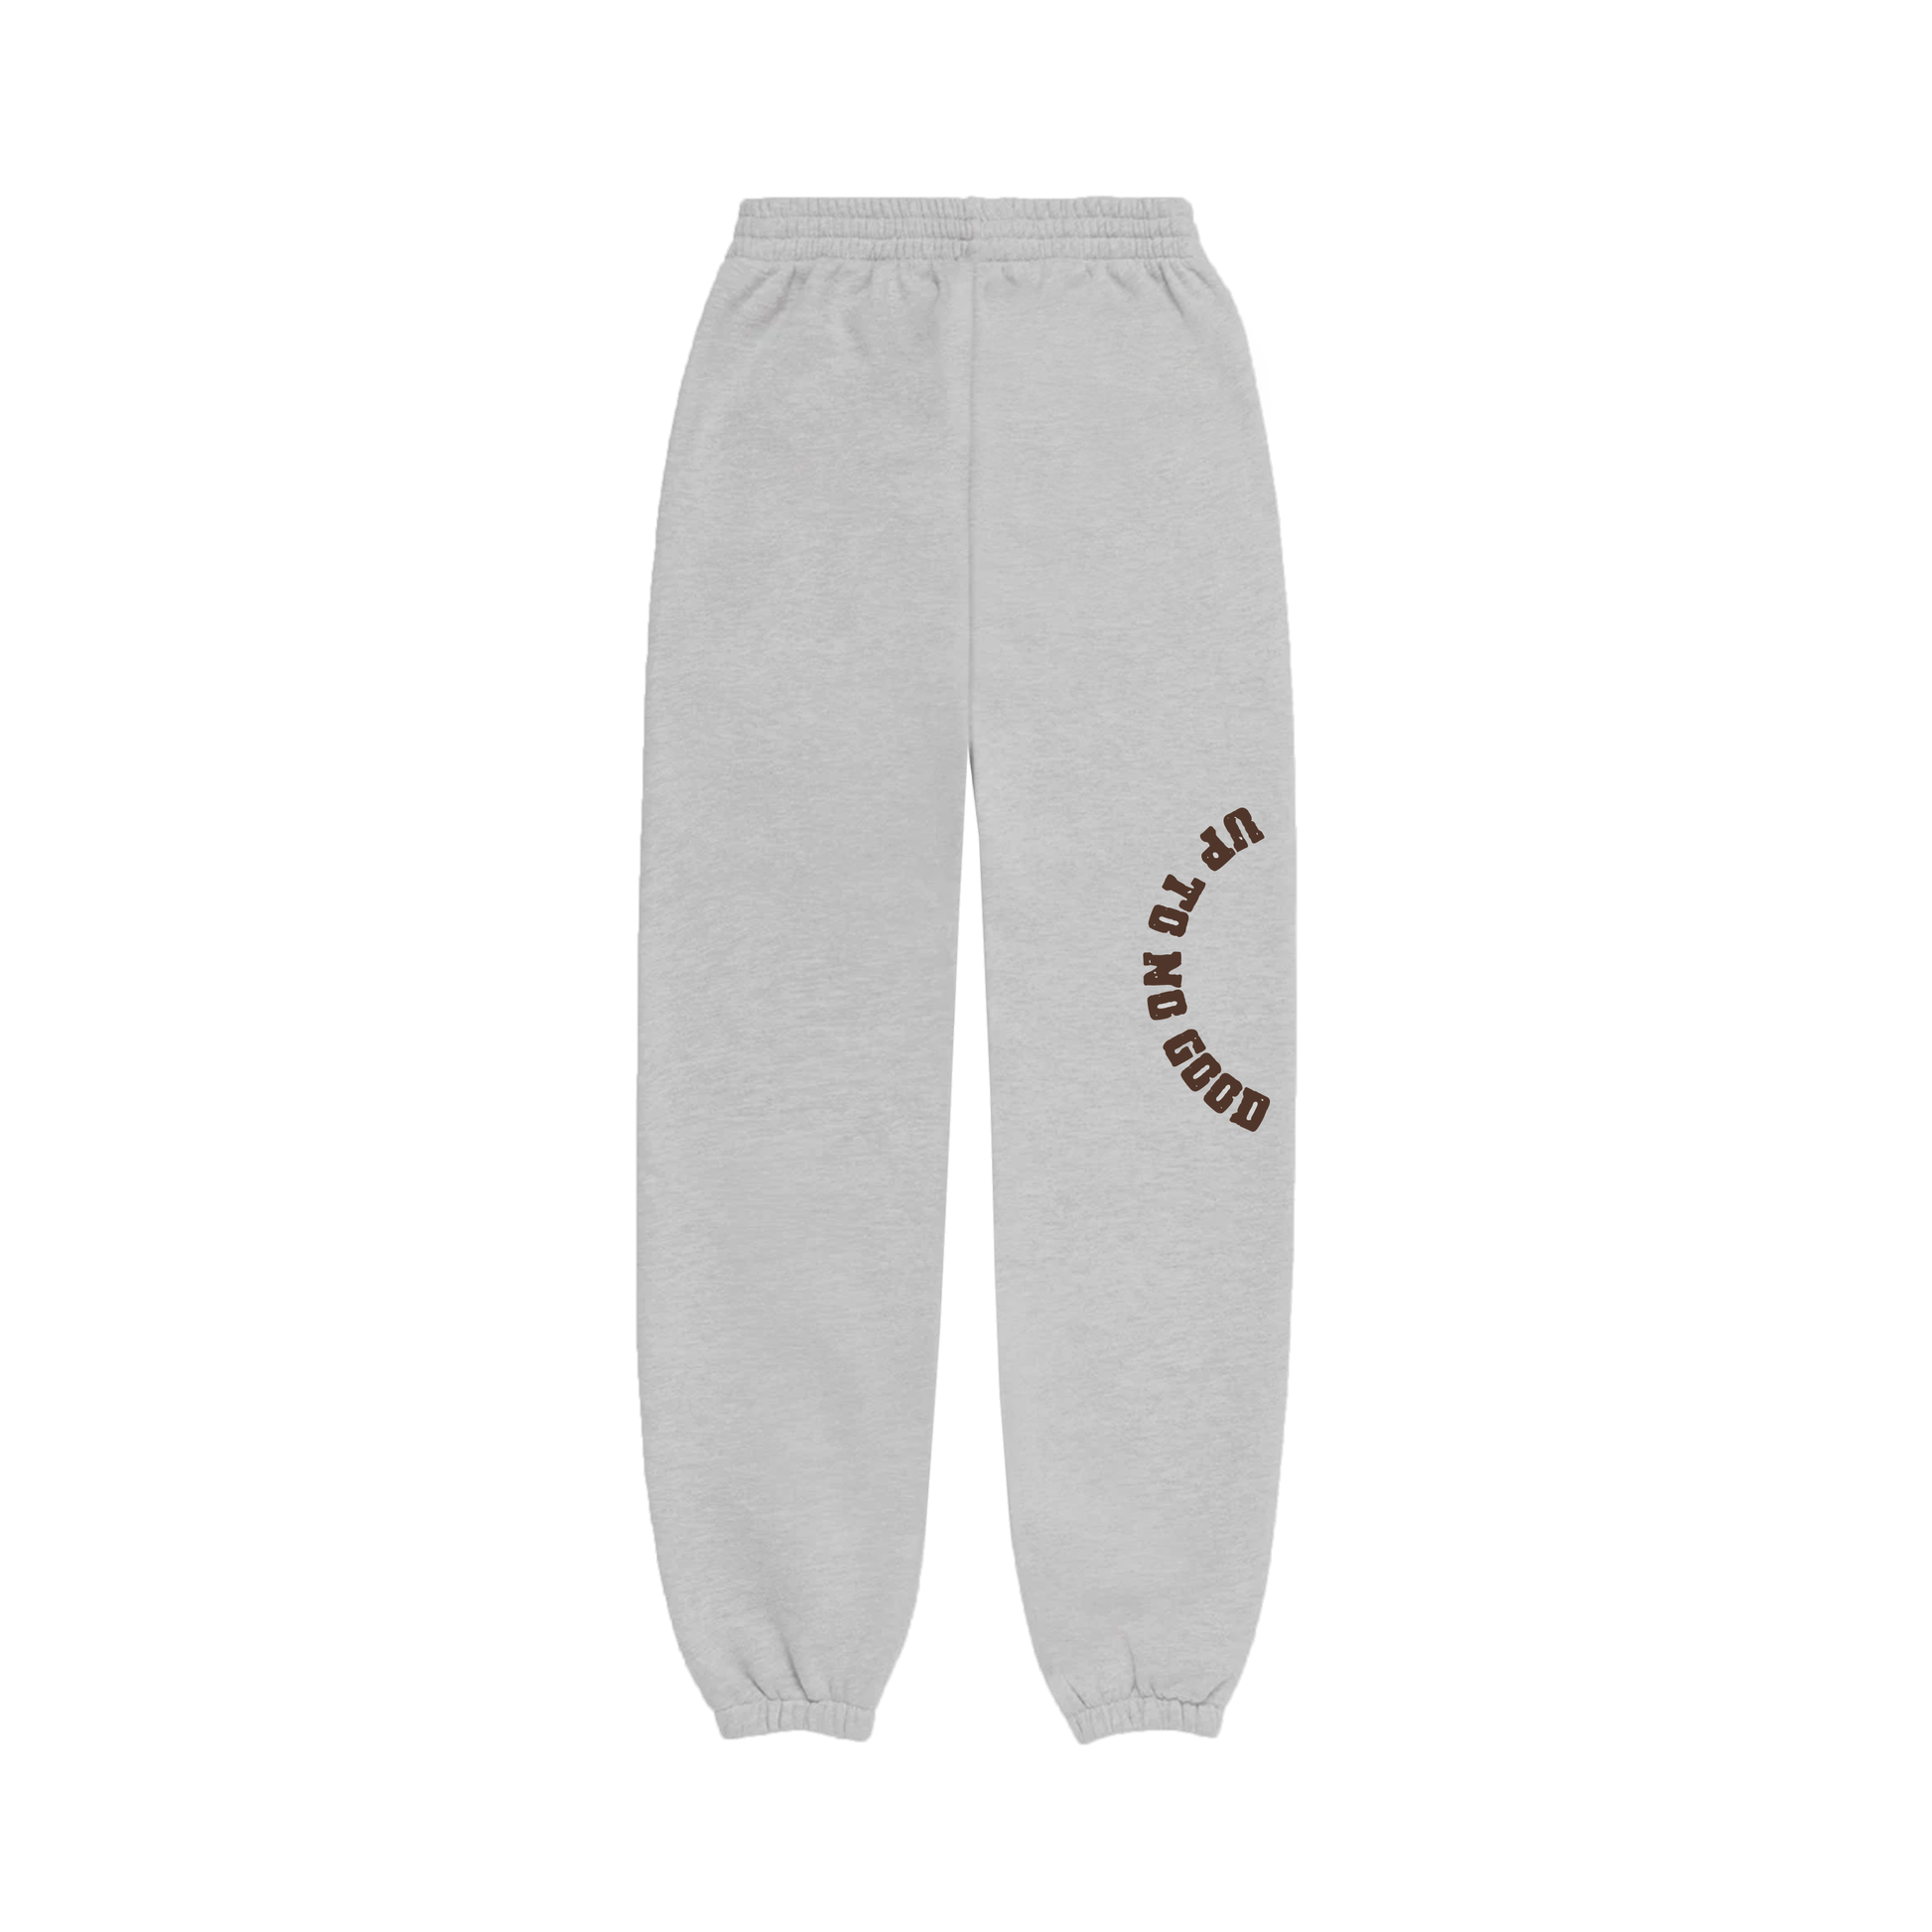 Up To No Good Sweatpants - Scheming Co.